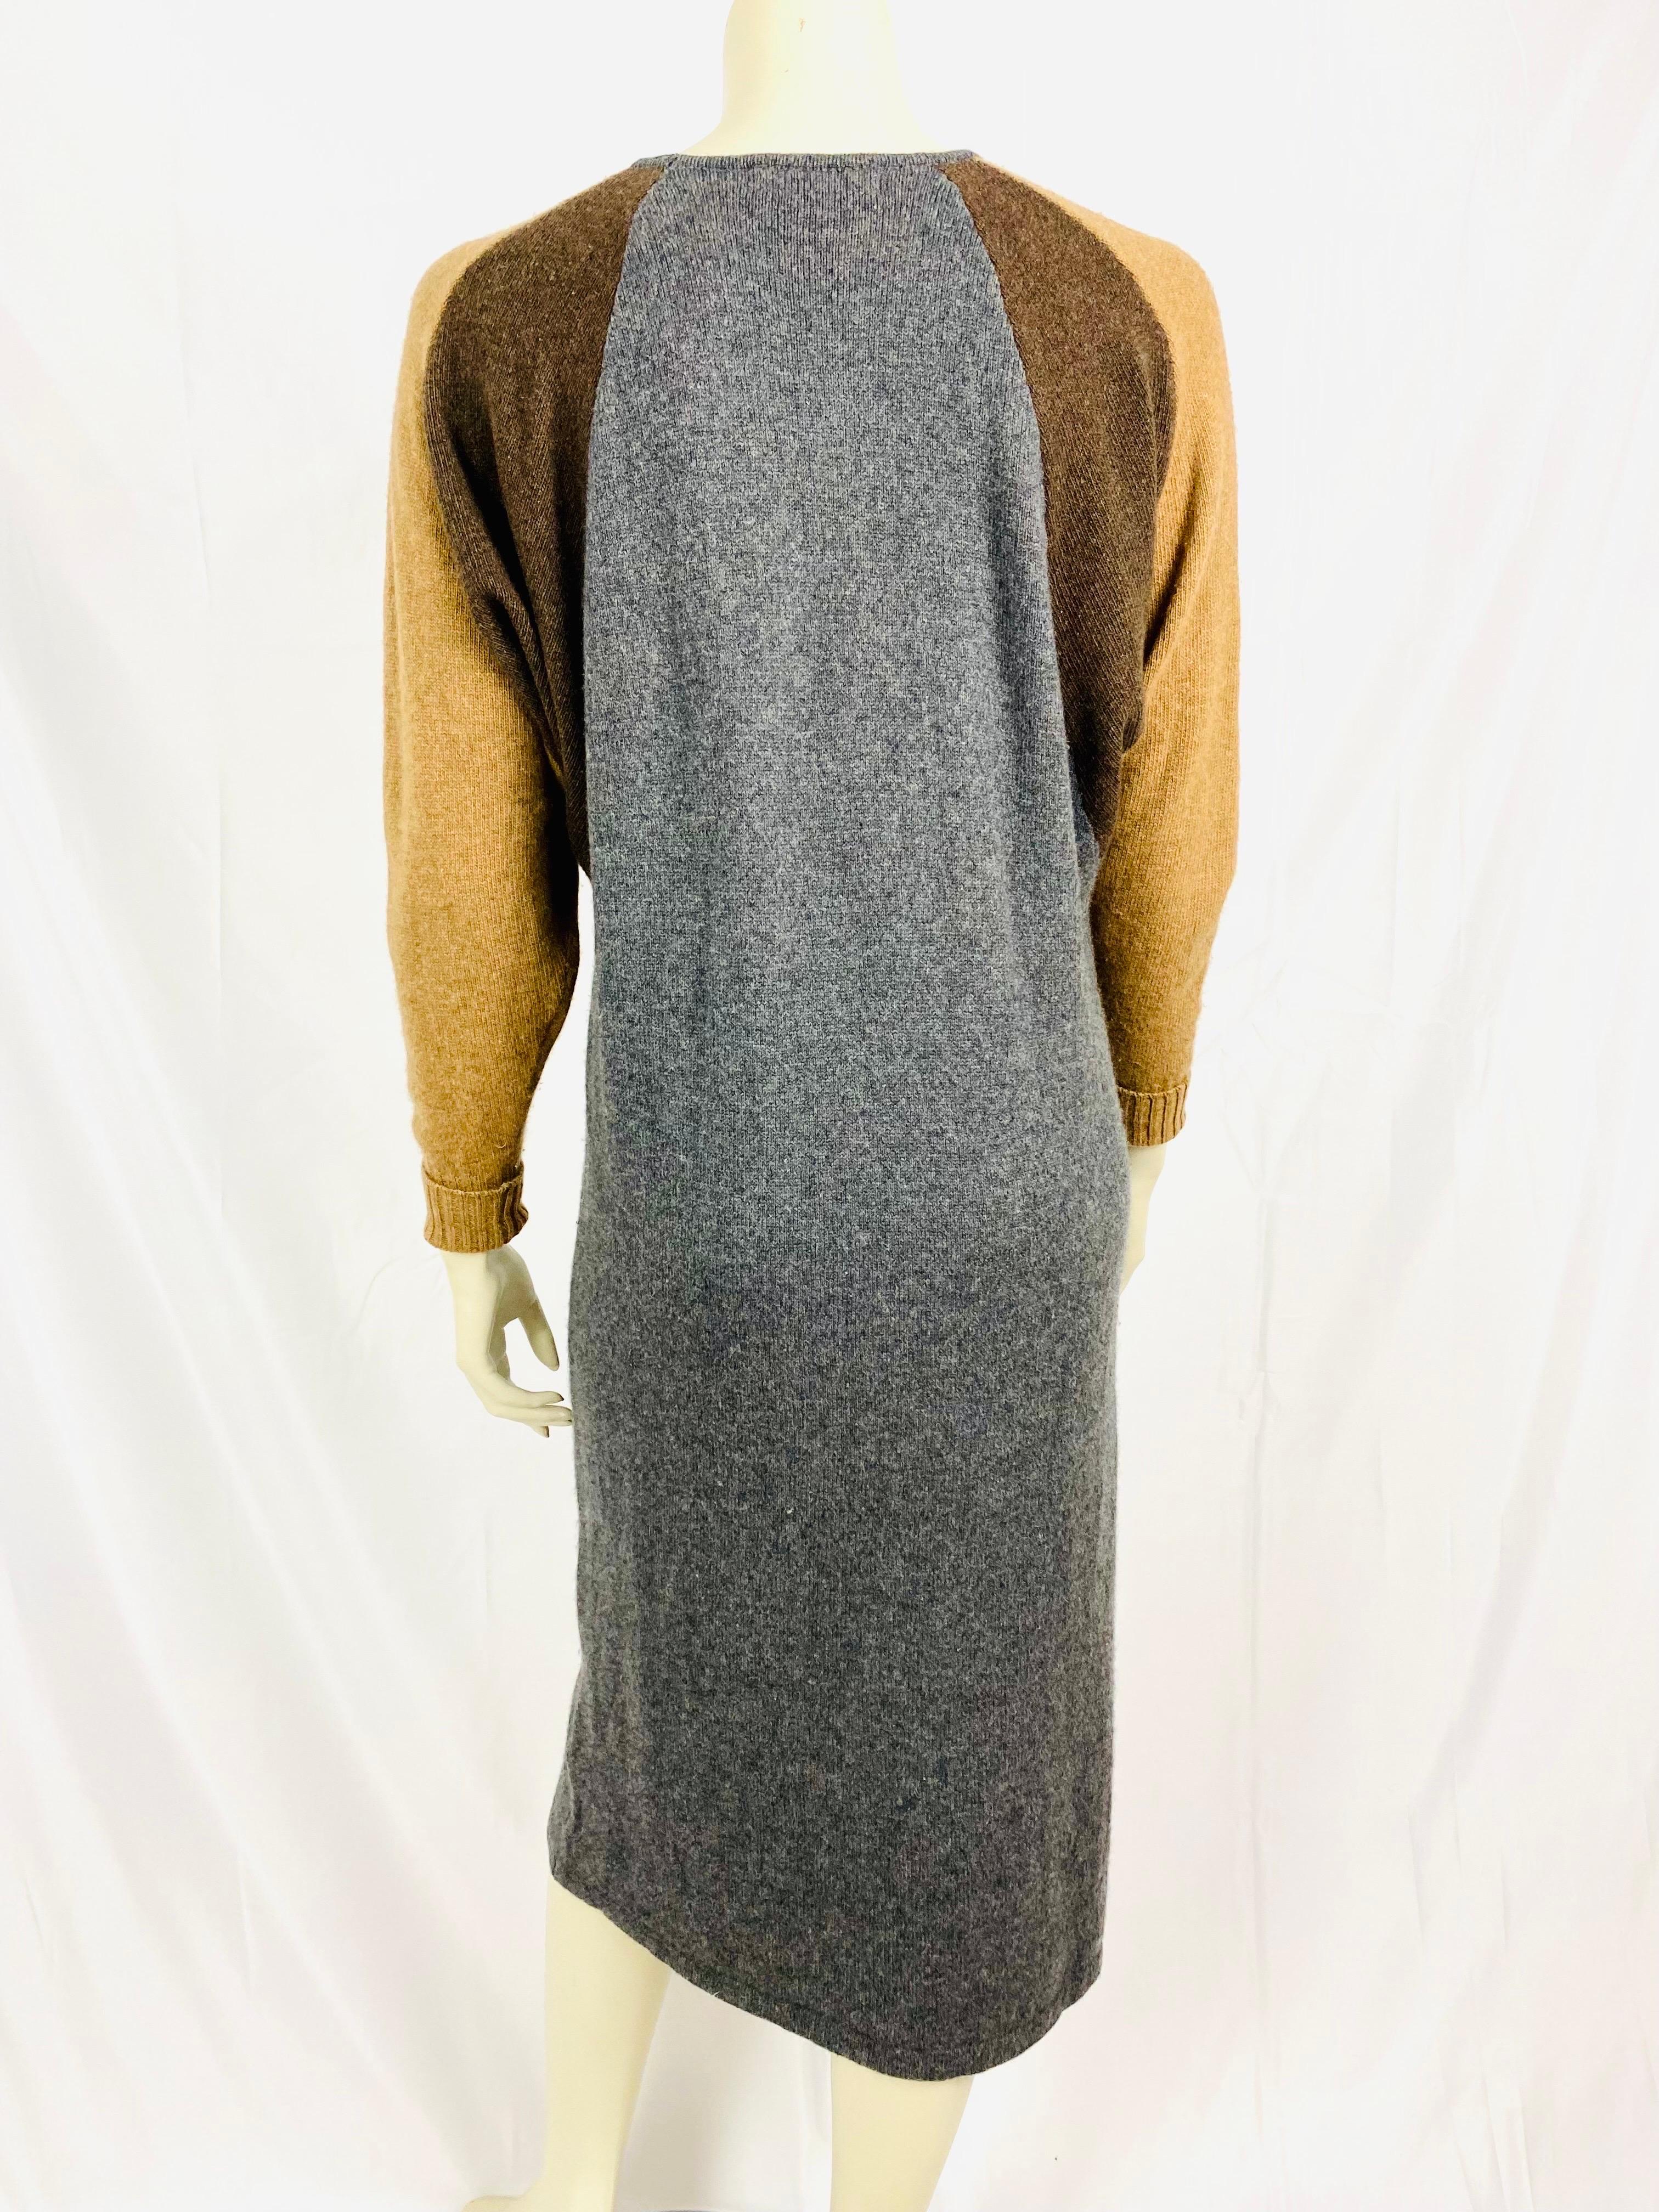 Vintage Issey Miyake cashmere sweater dress from 1980 For Sale 1